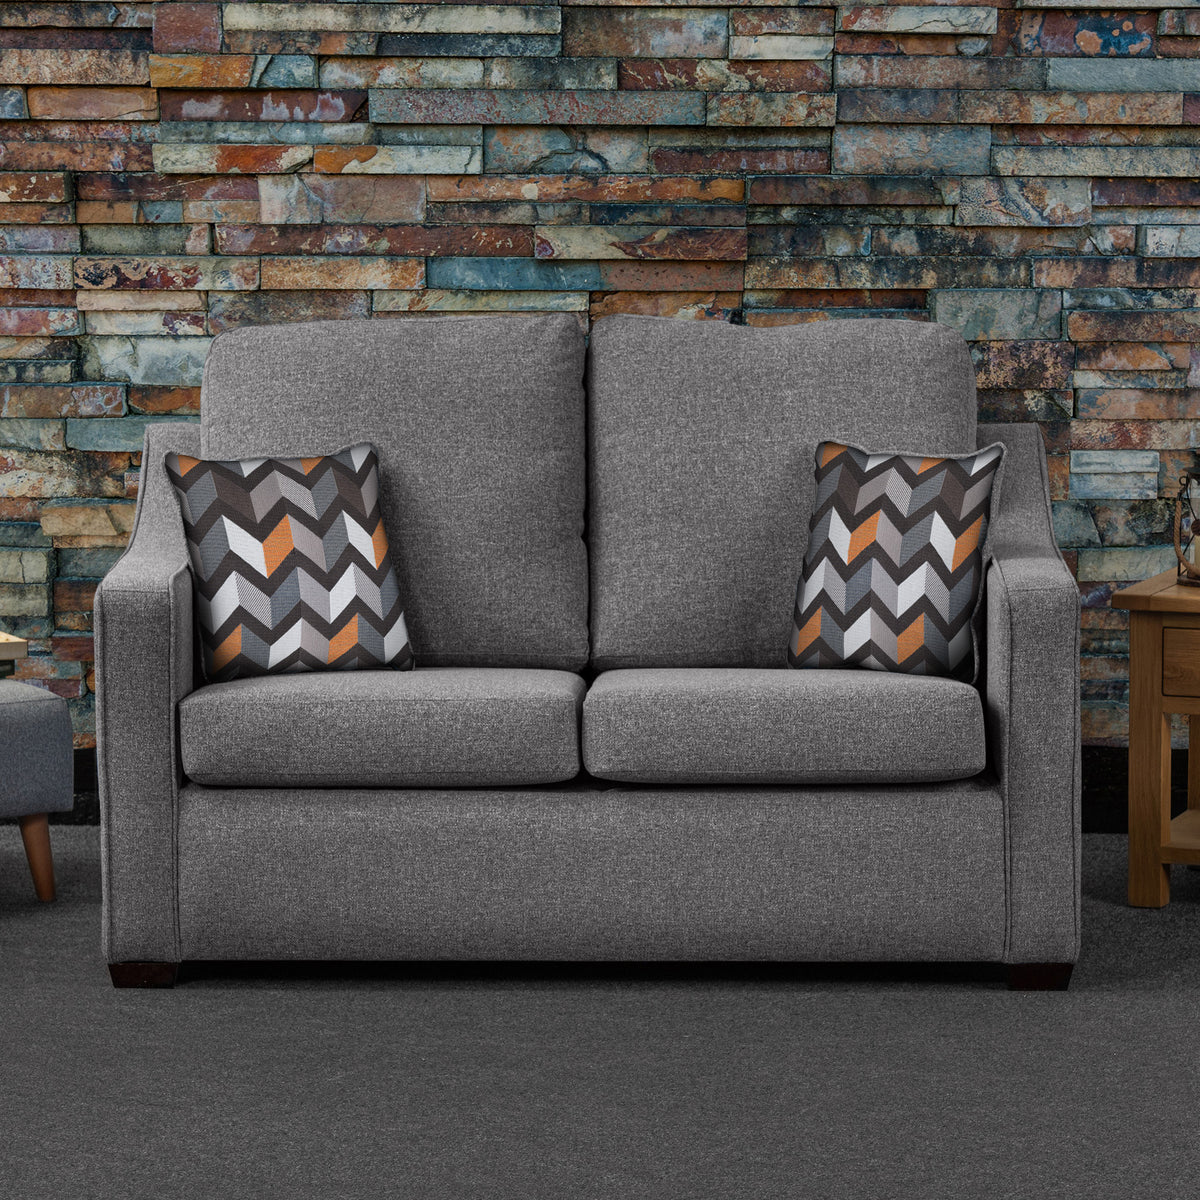 Fenton Charcoal Soft Weave 2 Seater Sofabed with Charcoal Scatter Cushions from Roseland Furniture